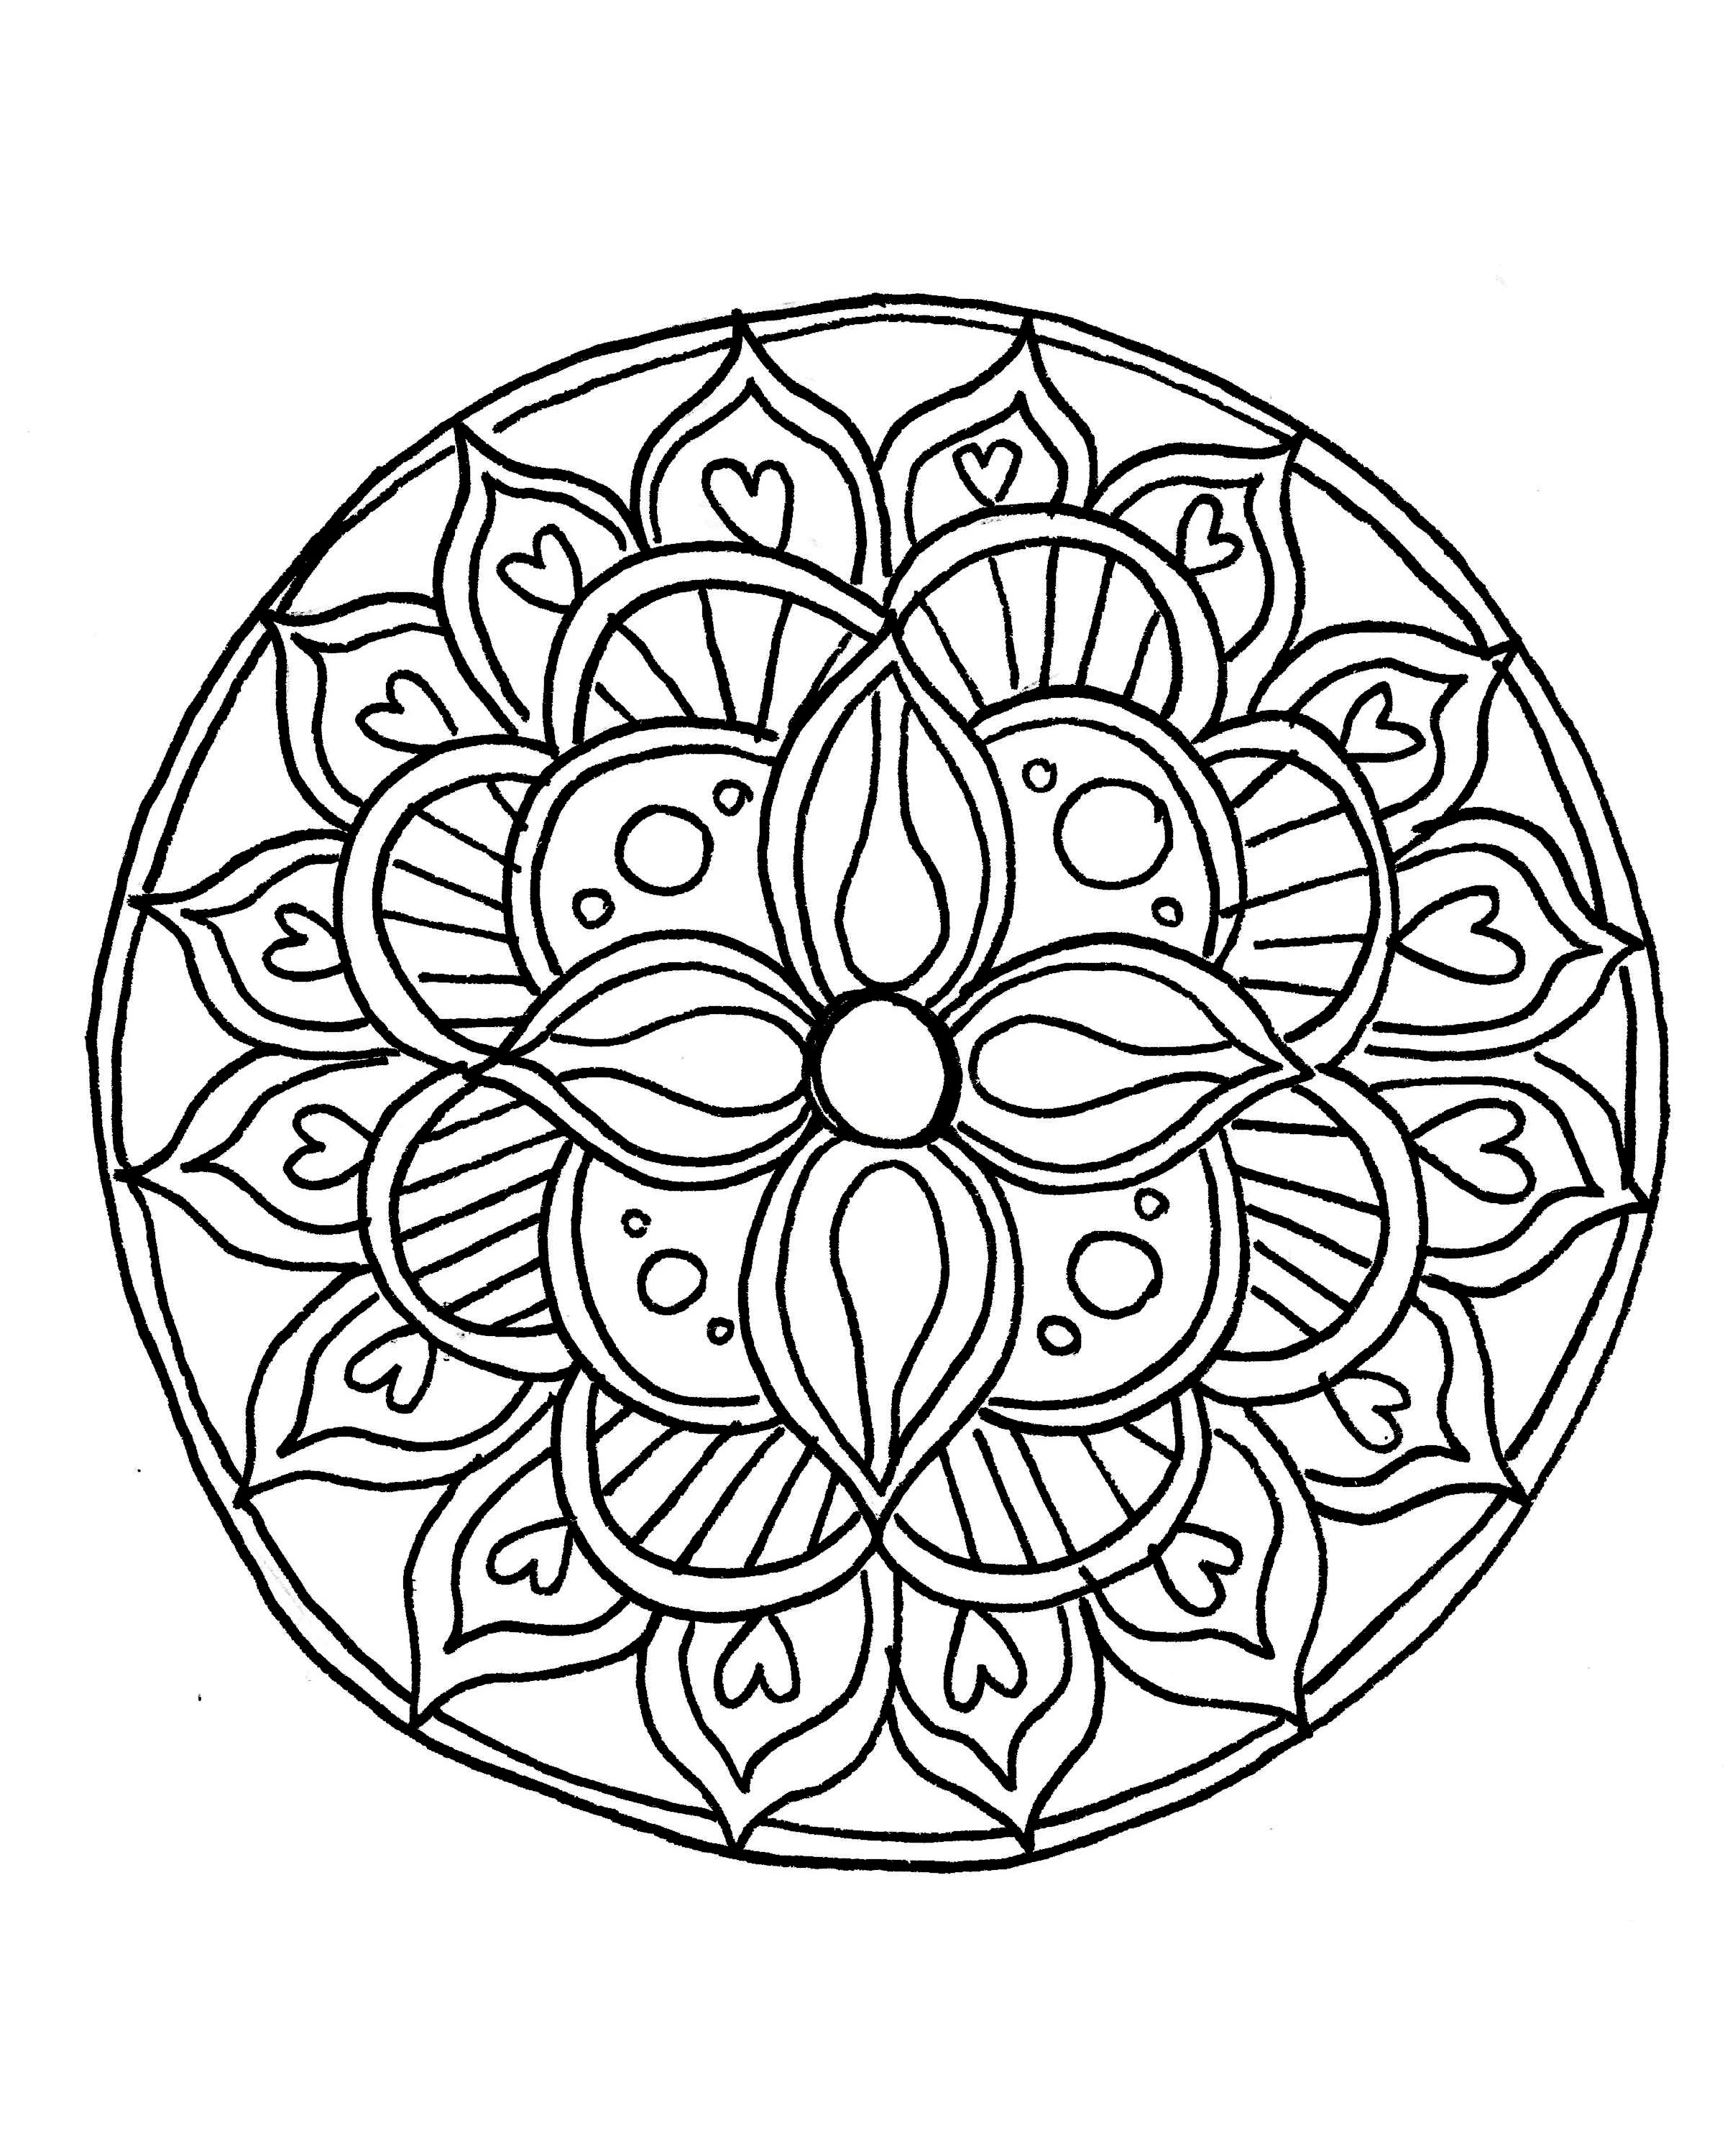 Mandala Coloring Book Pages
 How to Draw a Mandala With FREE Coloring Pages